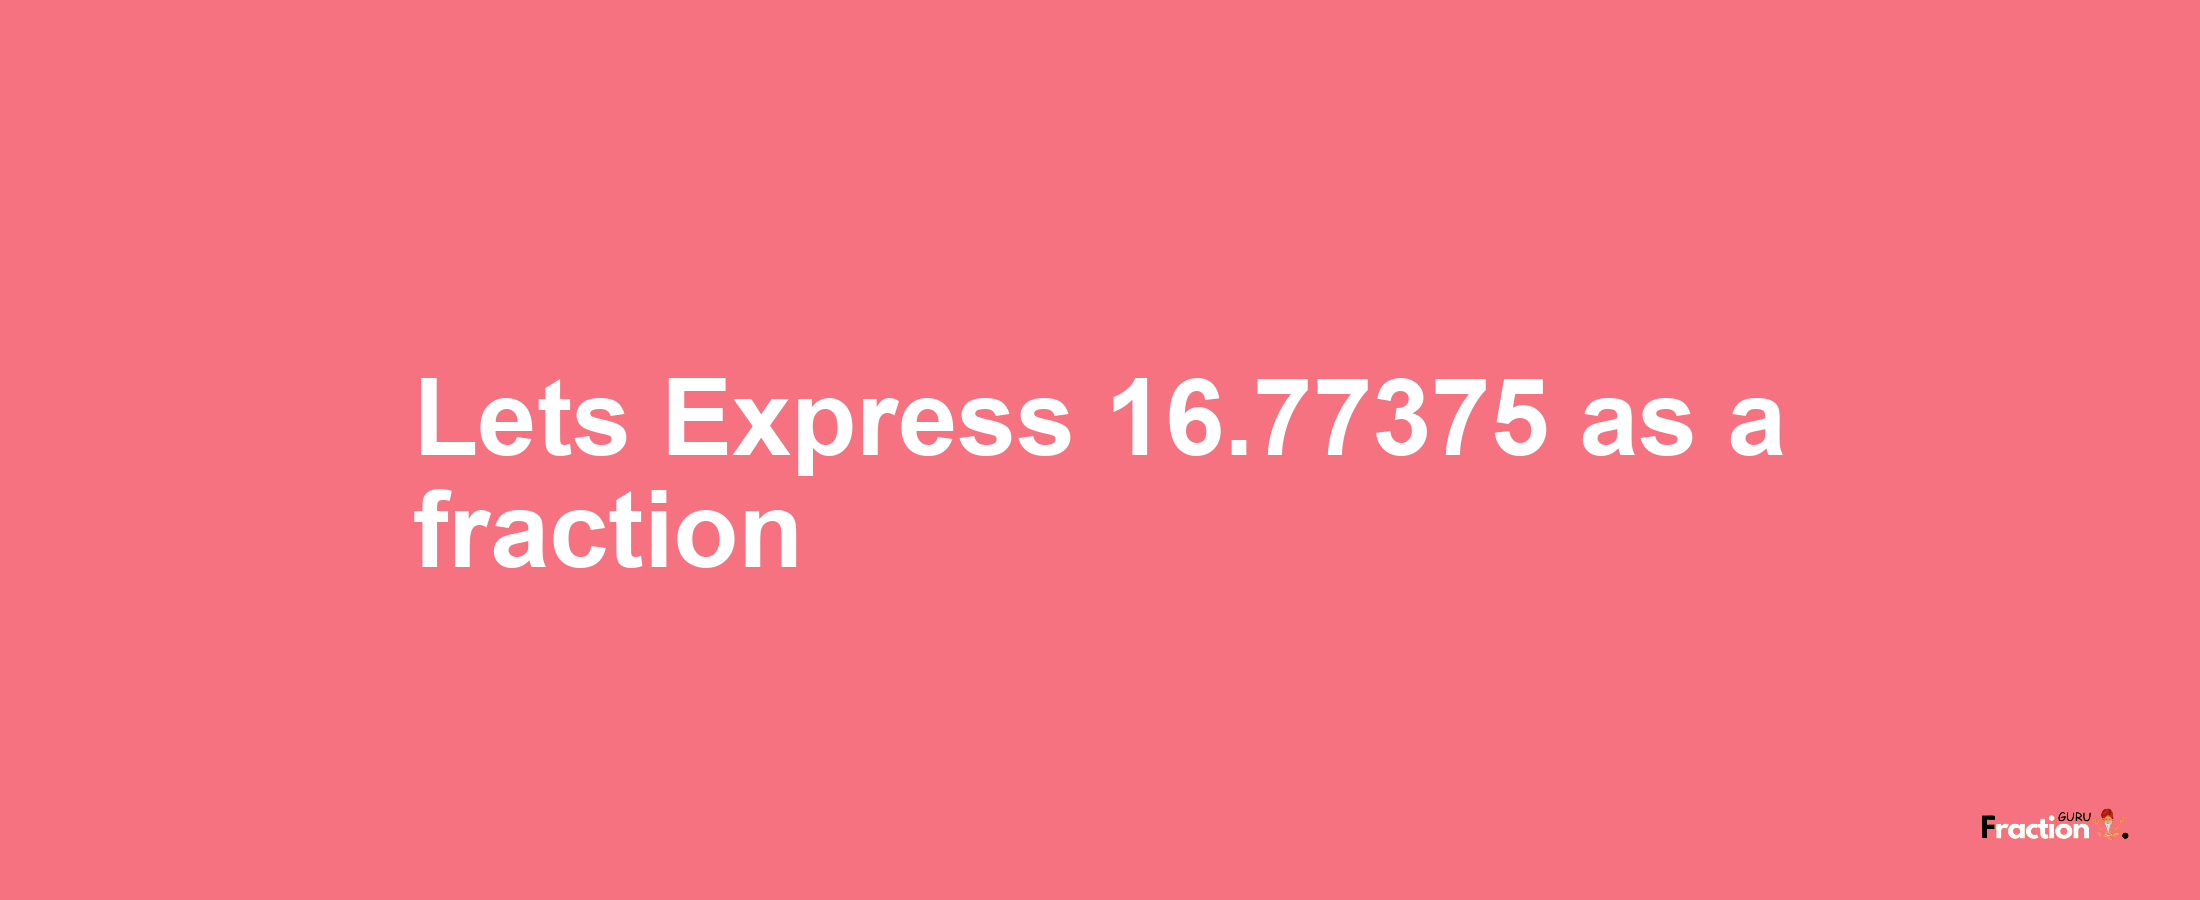 Lets Express 16.77375 as afraction